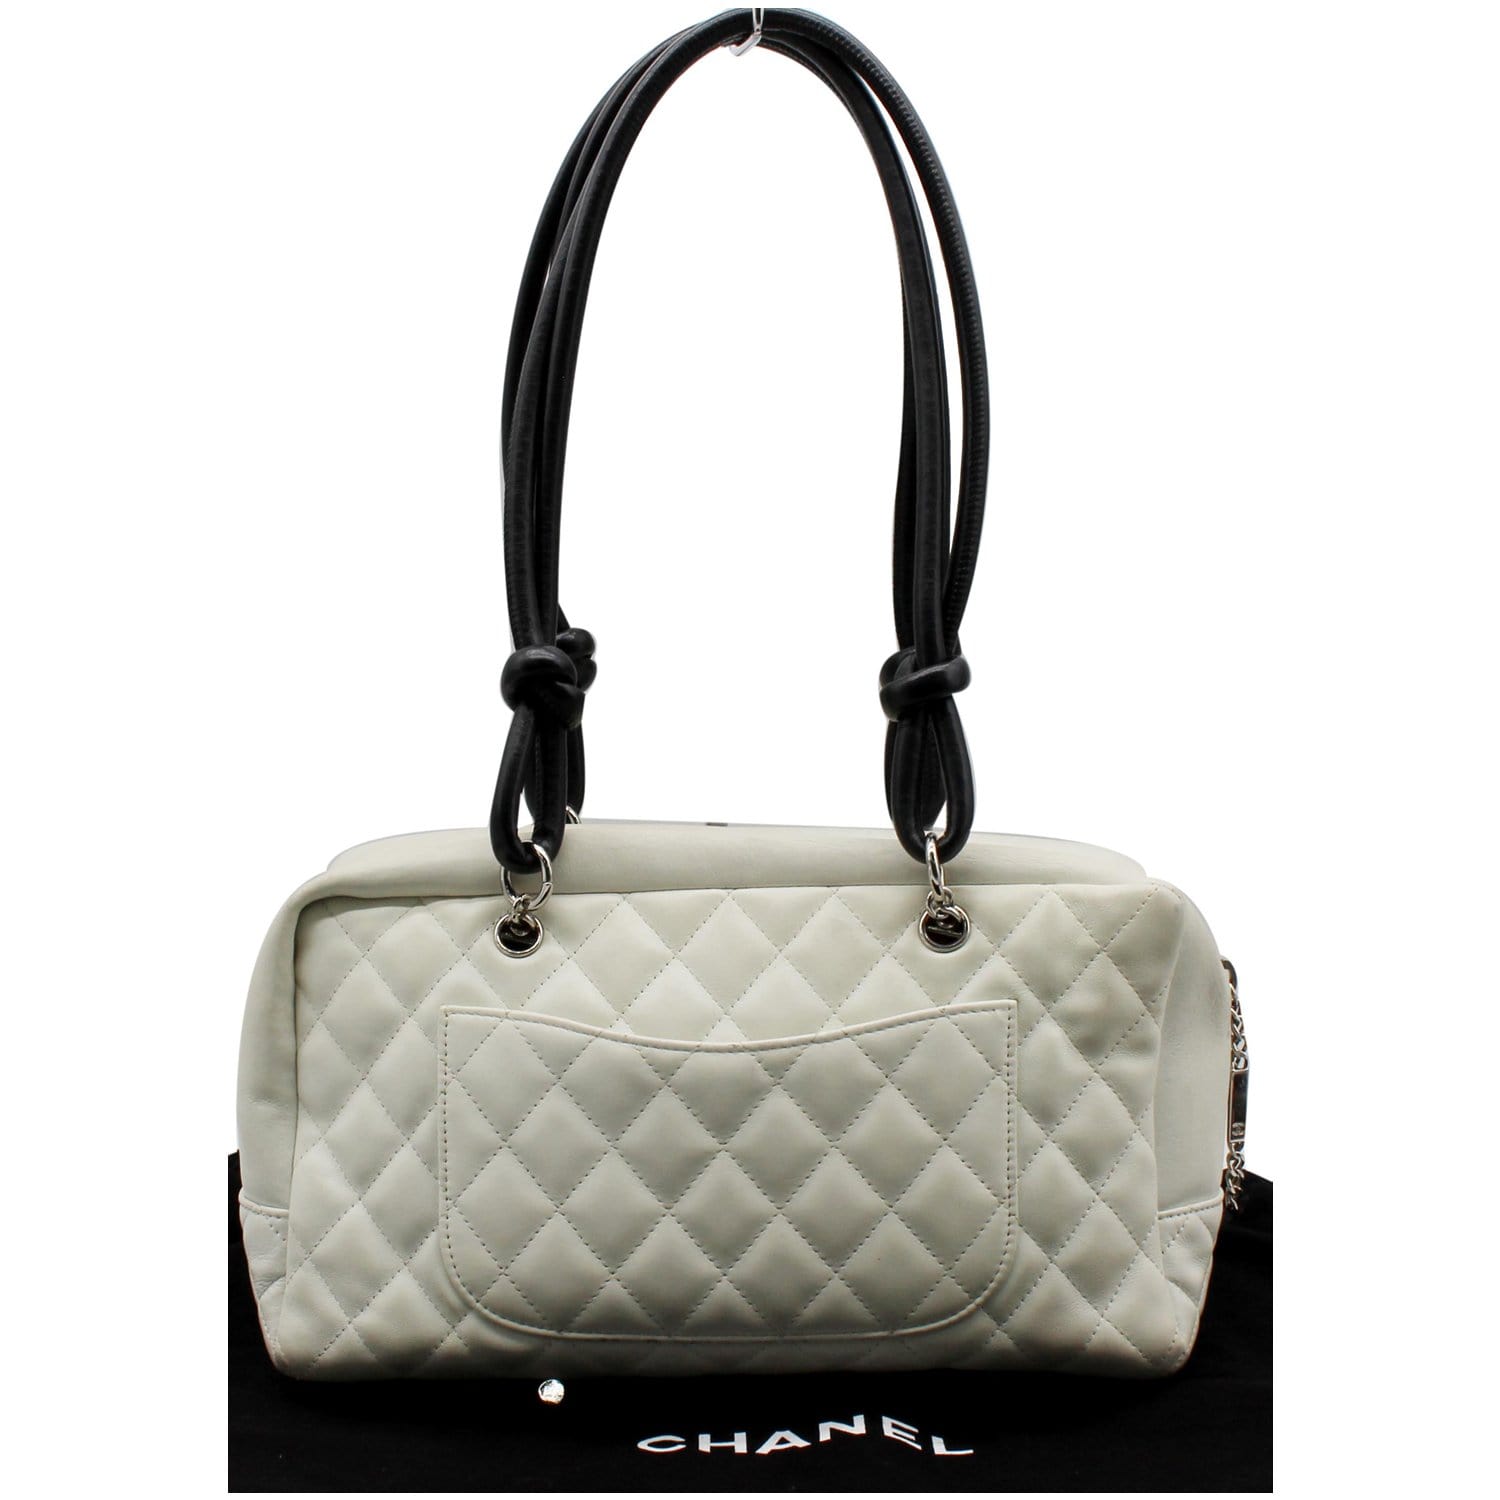 Chanel Cambon Quilted Leather Bowling Bag Black Pony-style